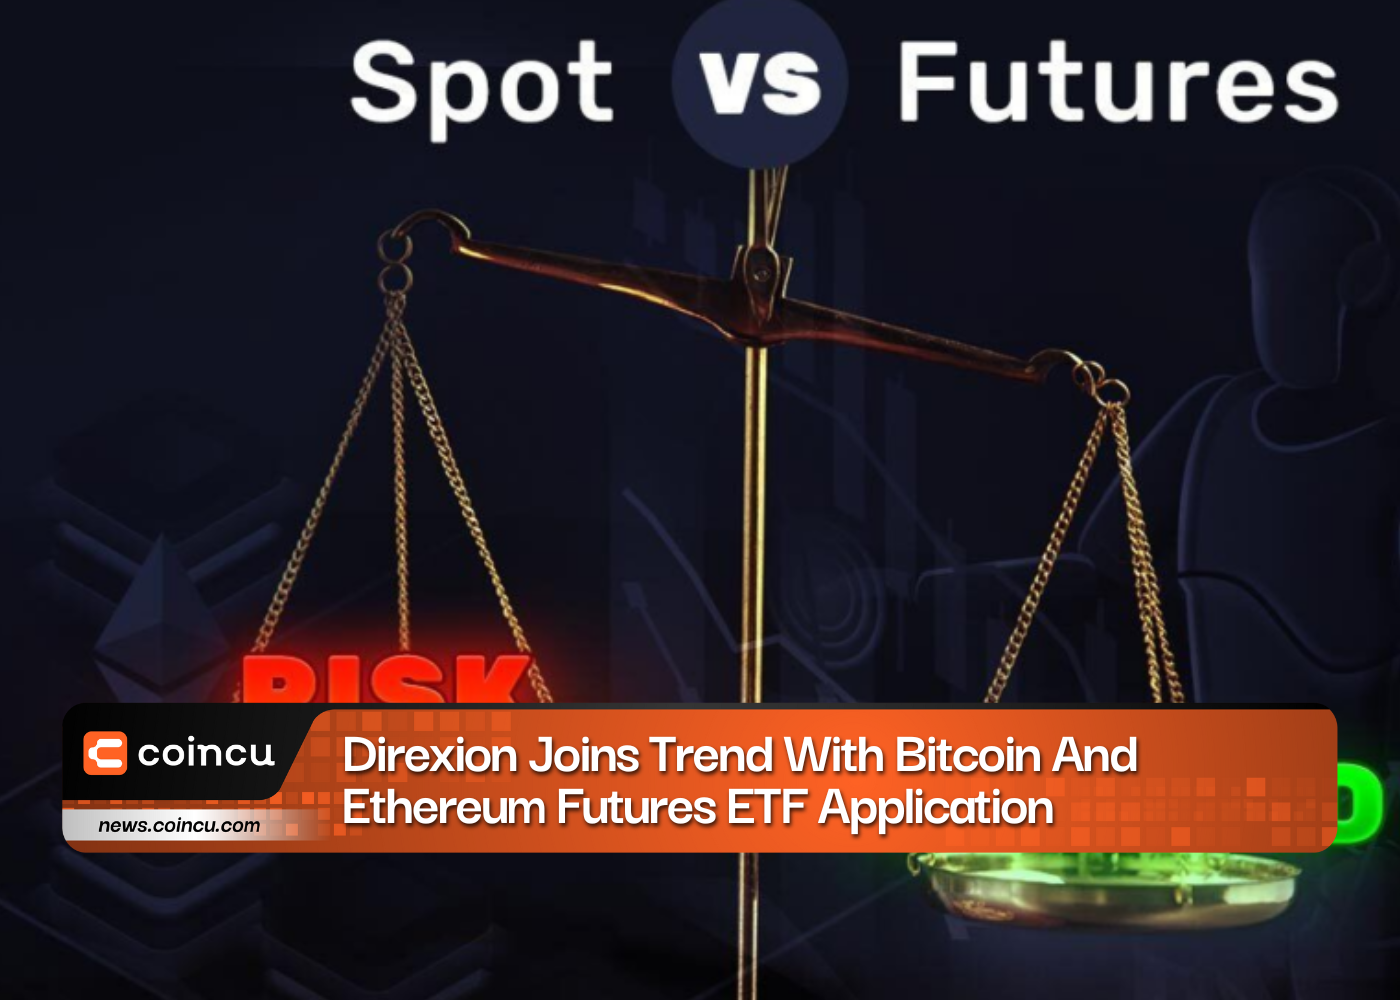 Direxion Joins Trend With Bitcoin And Ethereum Futures ETF Application